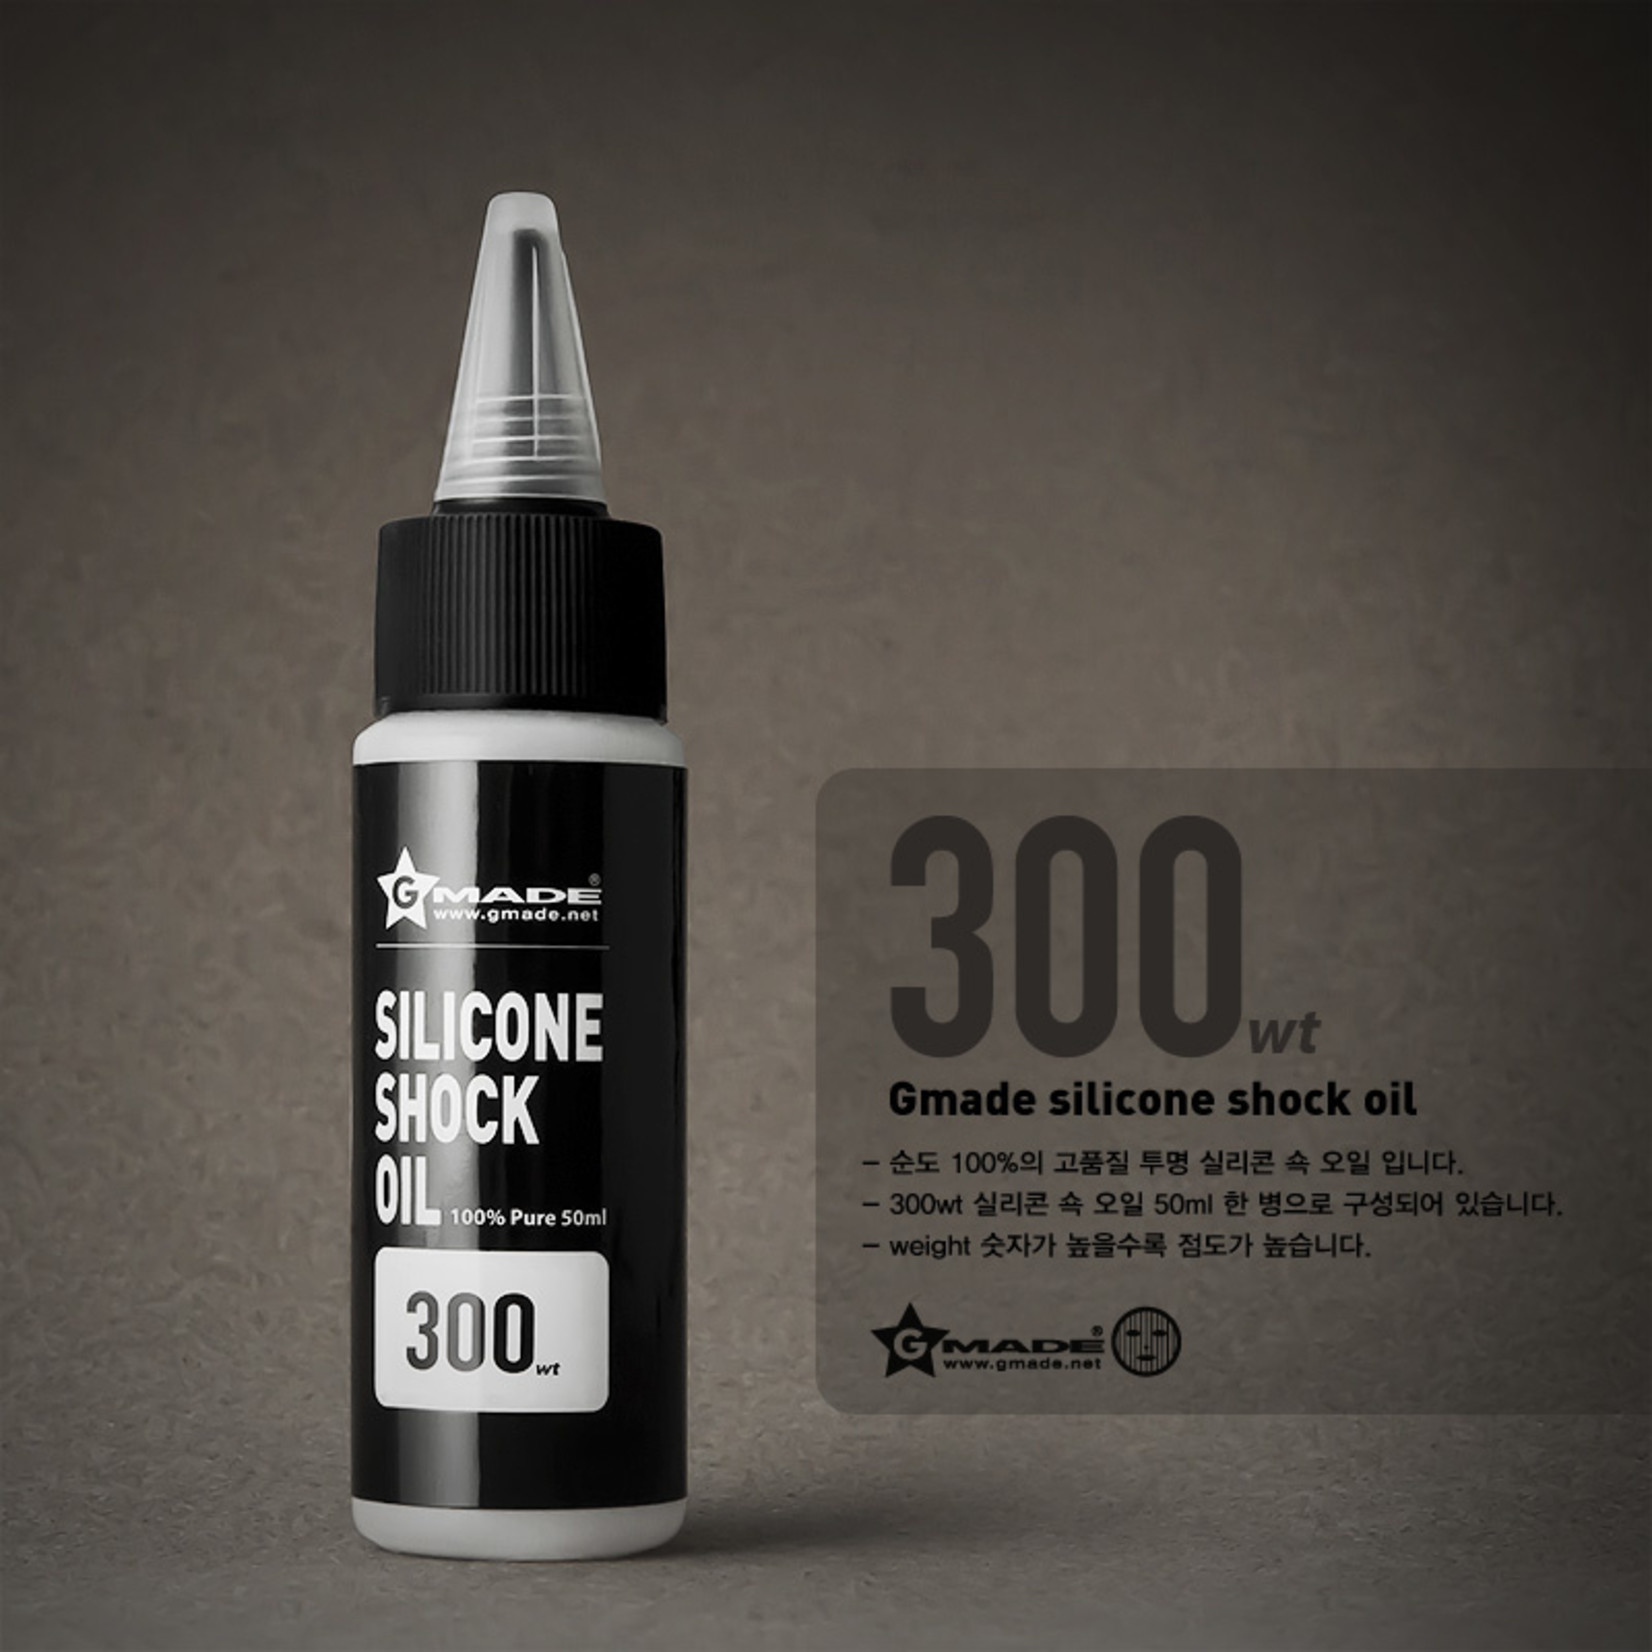 Gmade Silicone Shock Oil 300 Weight 50mL